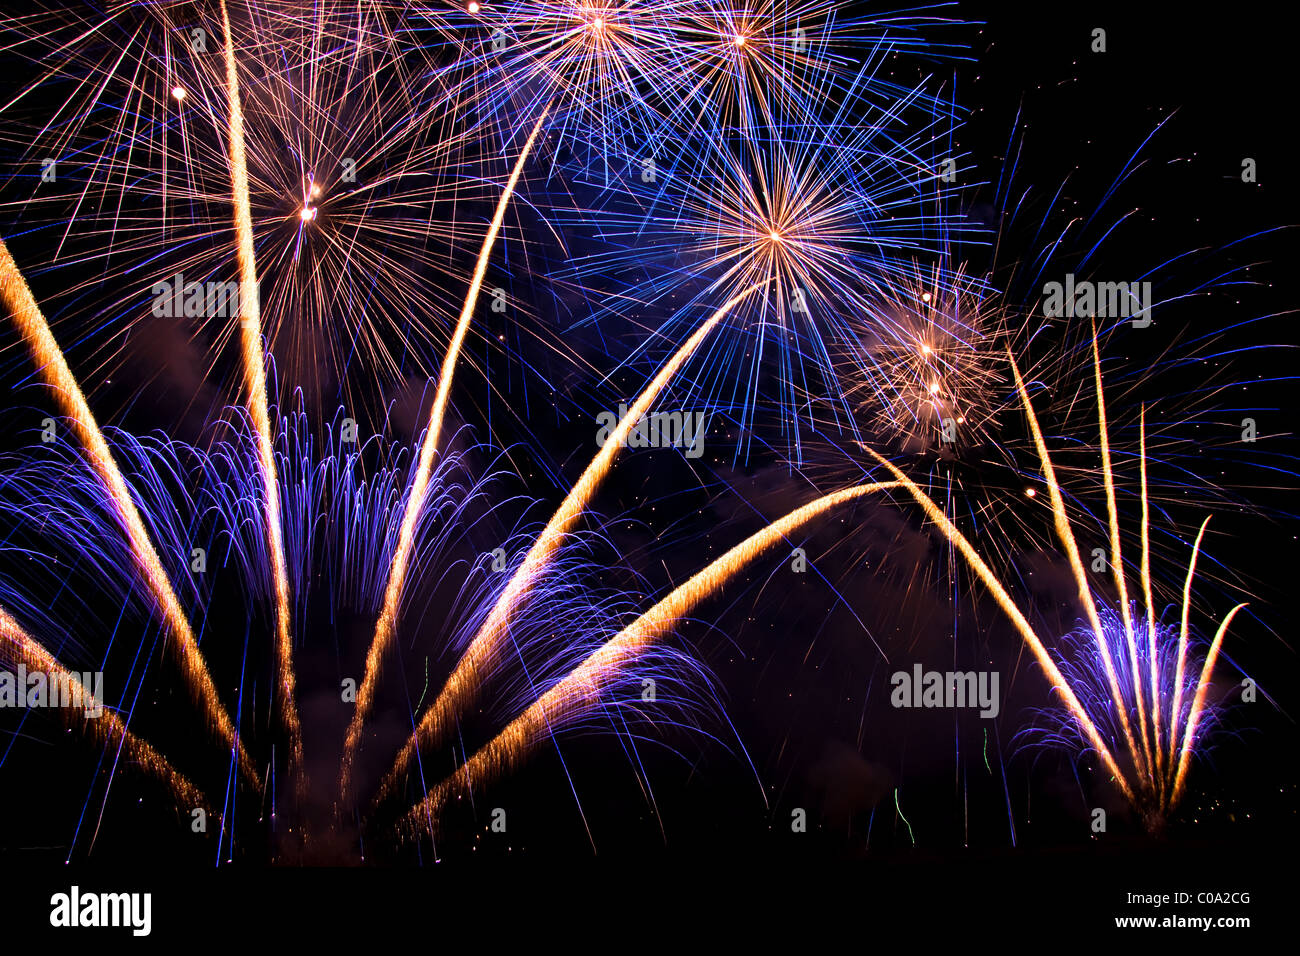 Fireworks of the competition 'Fiocchi di Luce'. Stock Photo